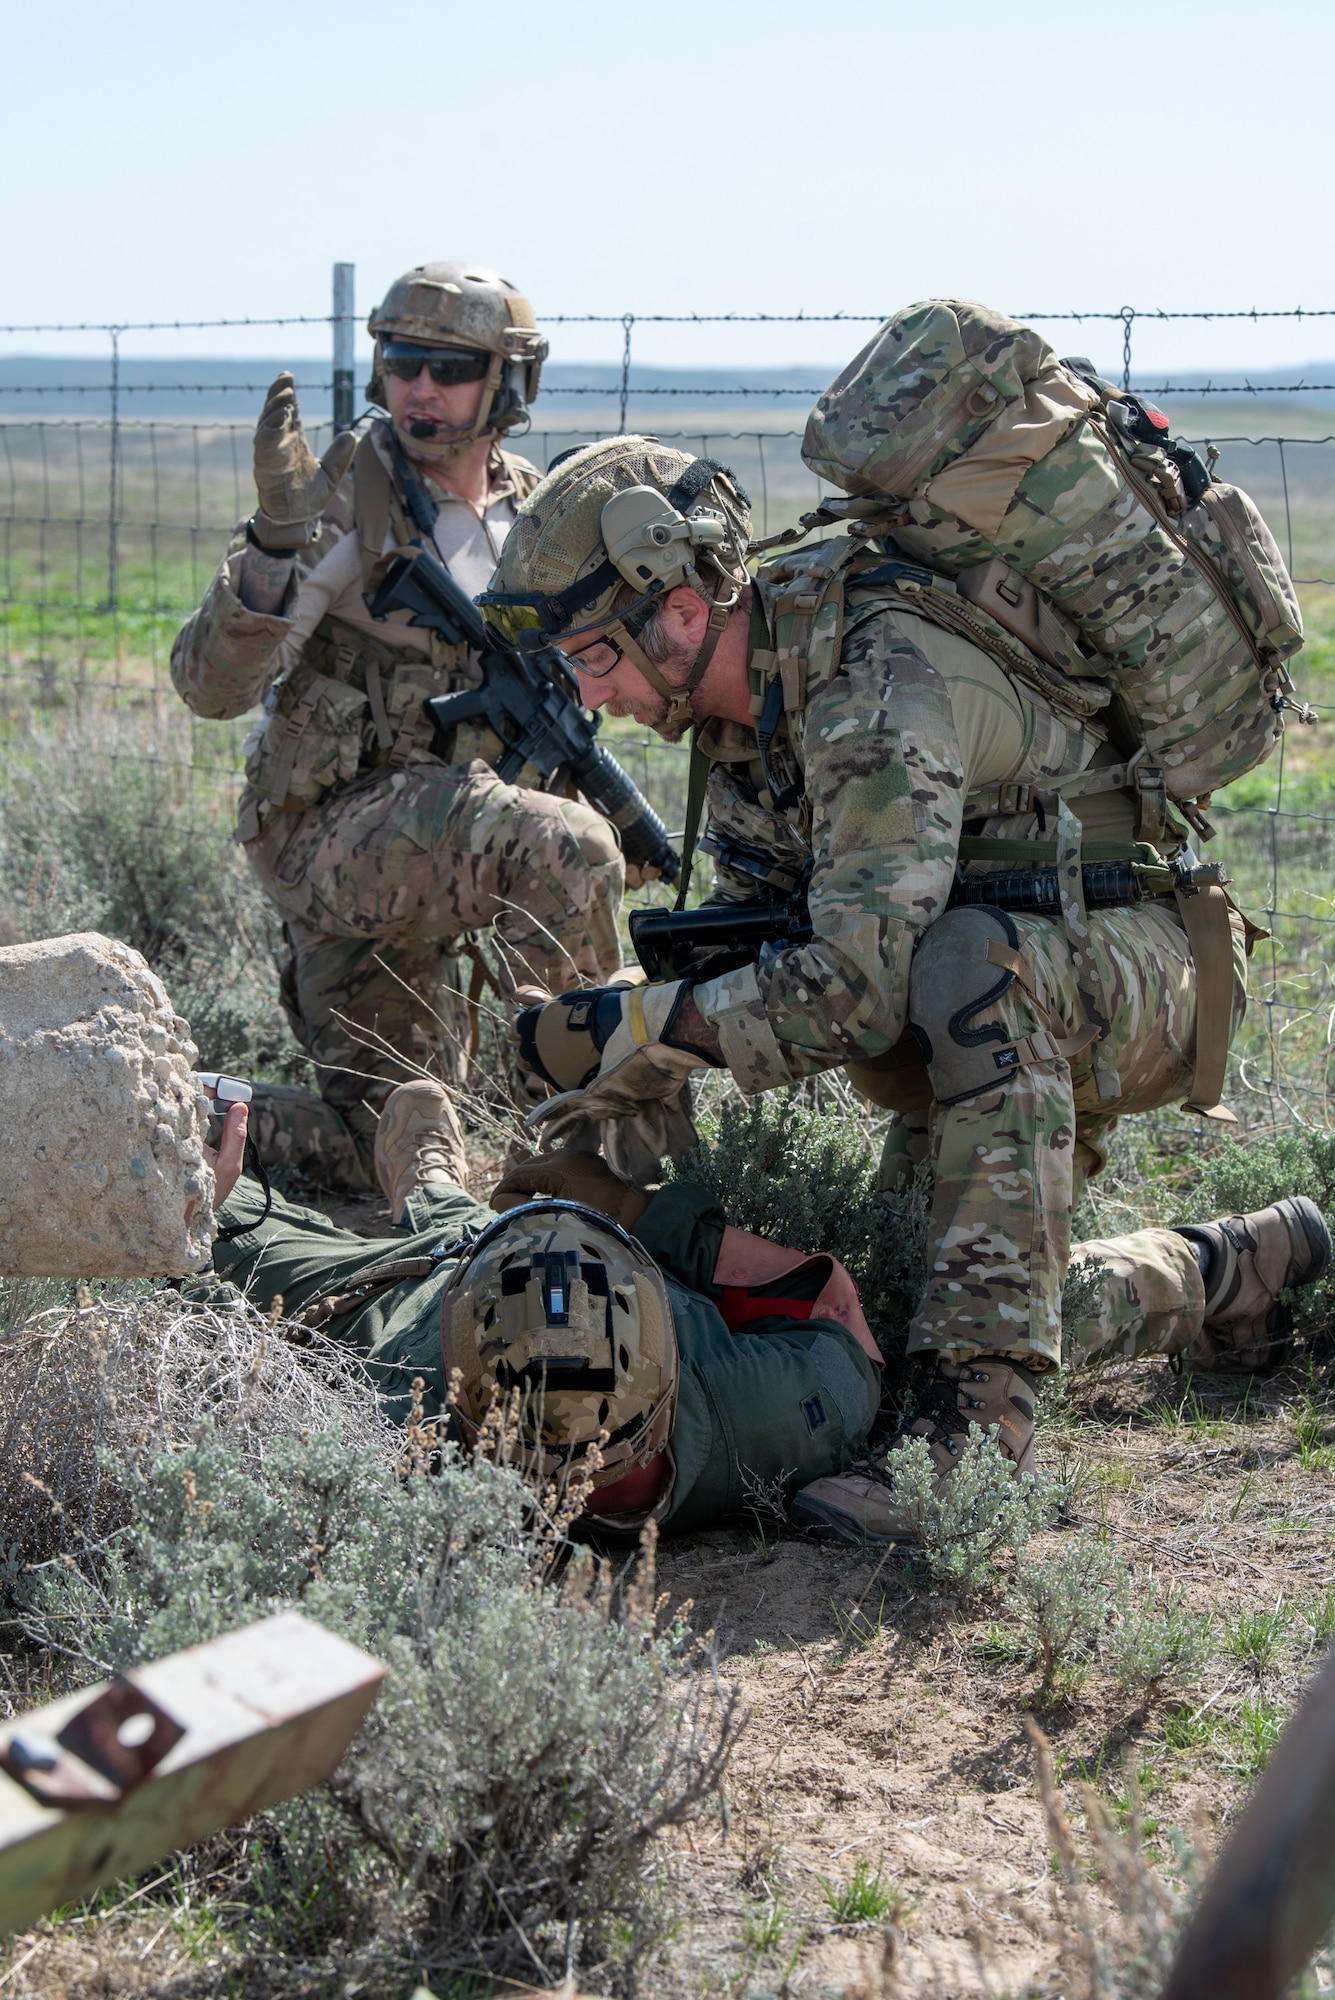 Airmen with the Kentucky Air National Guard’s 123rd Special Tactics Squadron help a simulated injured pilot during Exercise Agile Chariot near Riverton, Wyoming, May 2, 2023. Agile Chariot tested Agile Combat Employment capabilities, including using smaller, more dispersed locations and teams to rapidly move and support aircraft, pilots and other personnel wherever they’re needed. (U.S. Air National Guard photo by Master Sgt. Phil Speck)